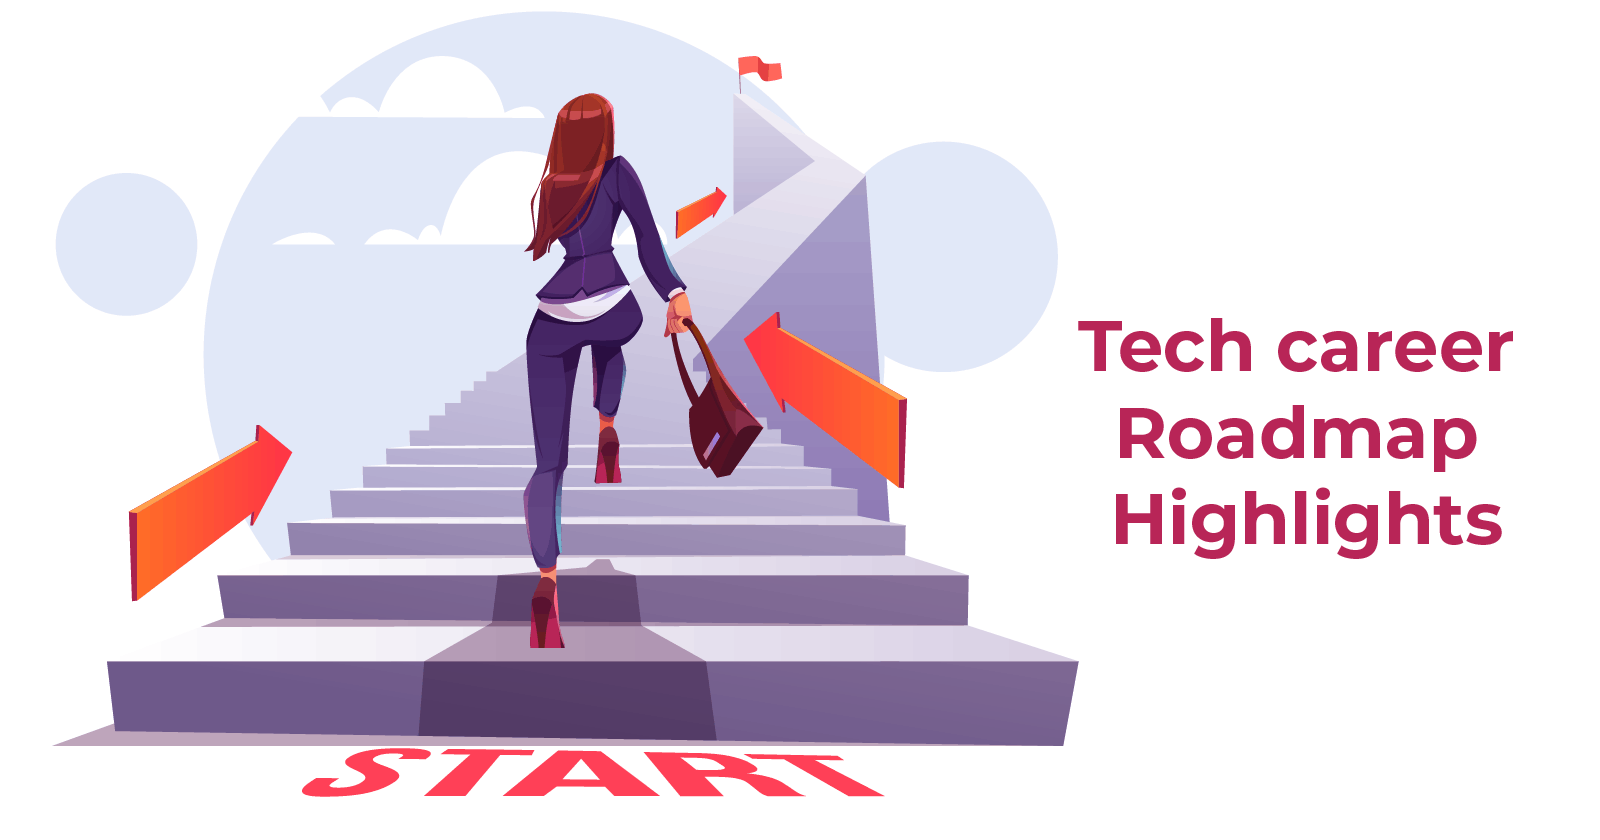 A Highlight for designing a Tech career